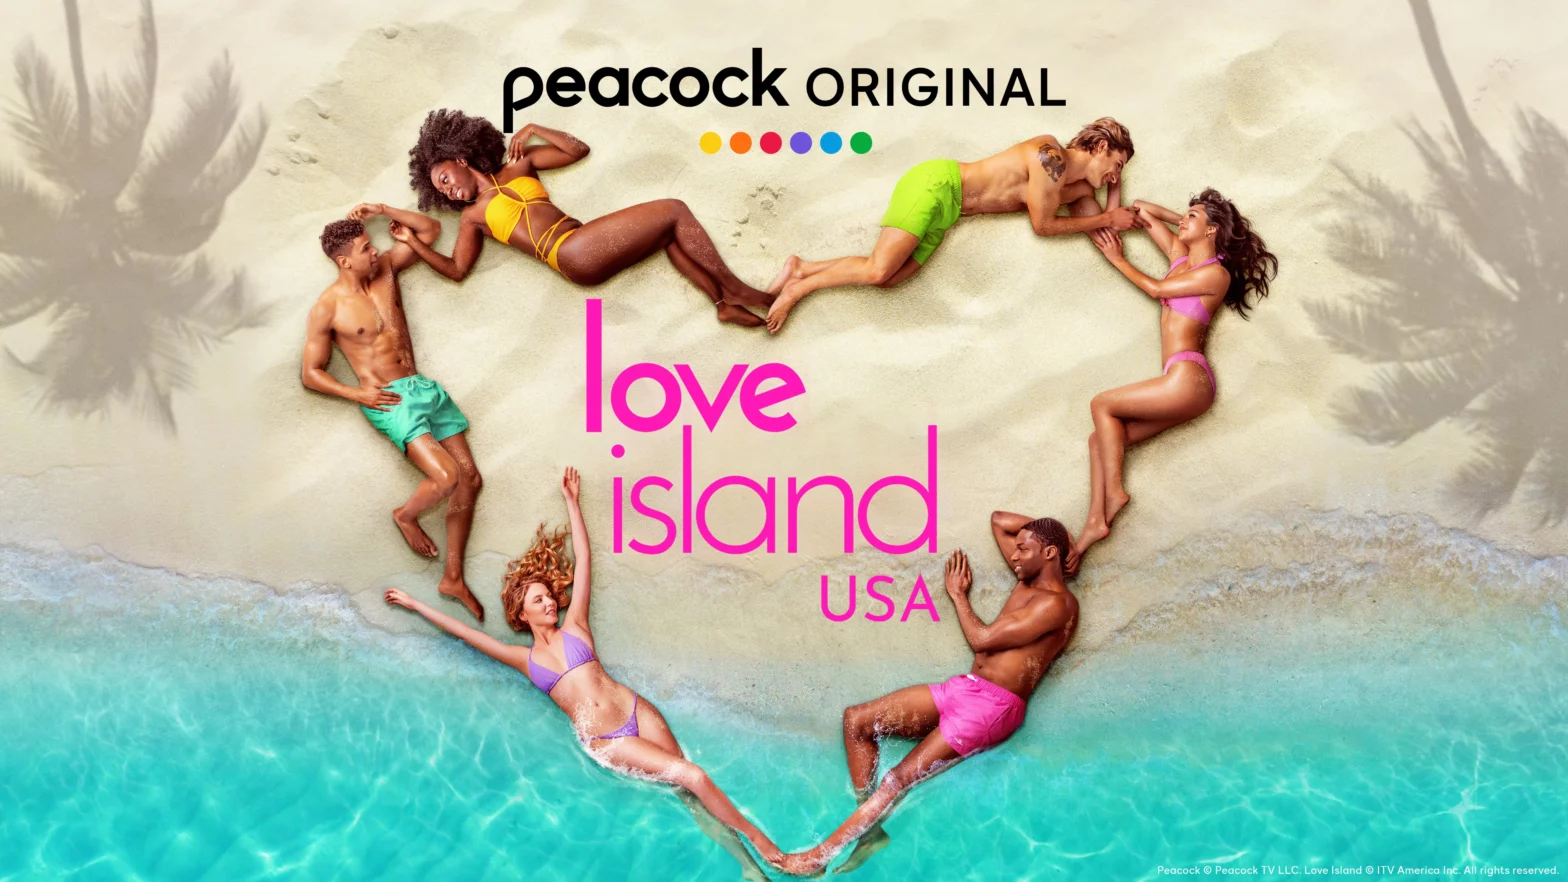 Love Island’s Perfect Soundtrack: DJ iSizzle’s ‘The One I Want’ Sets the Stage for Romance